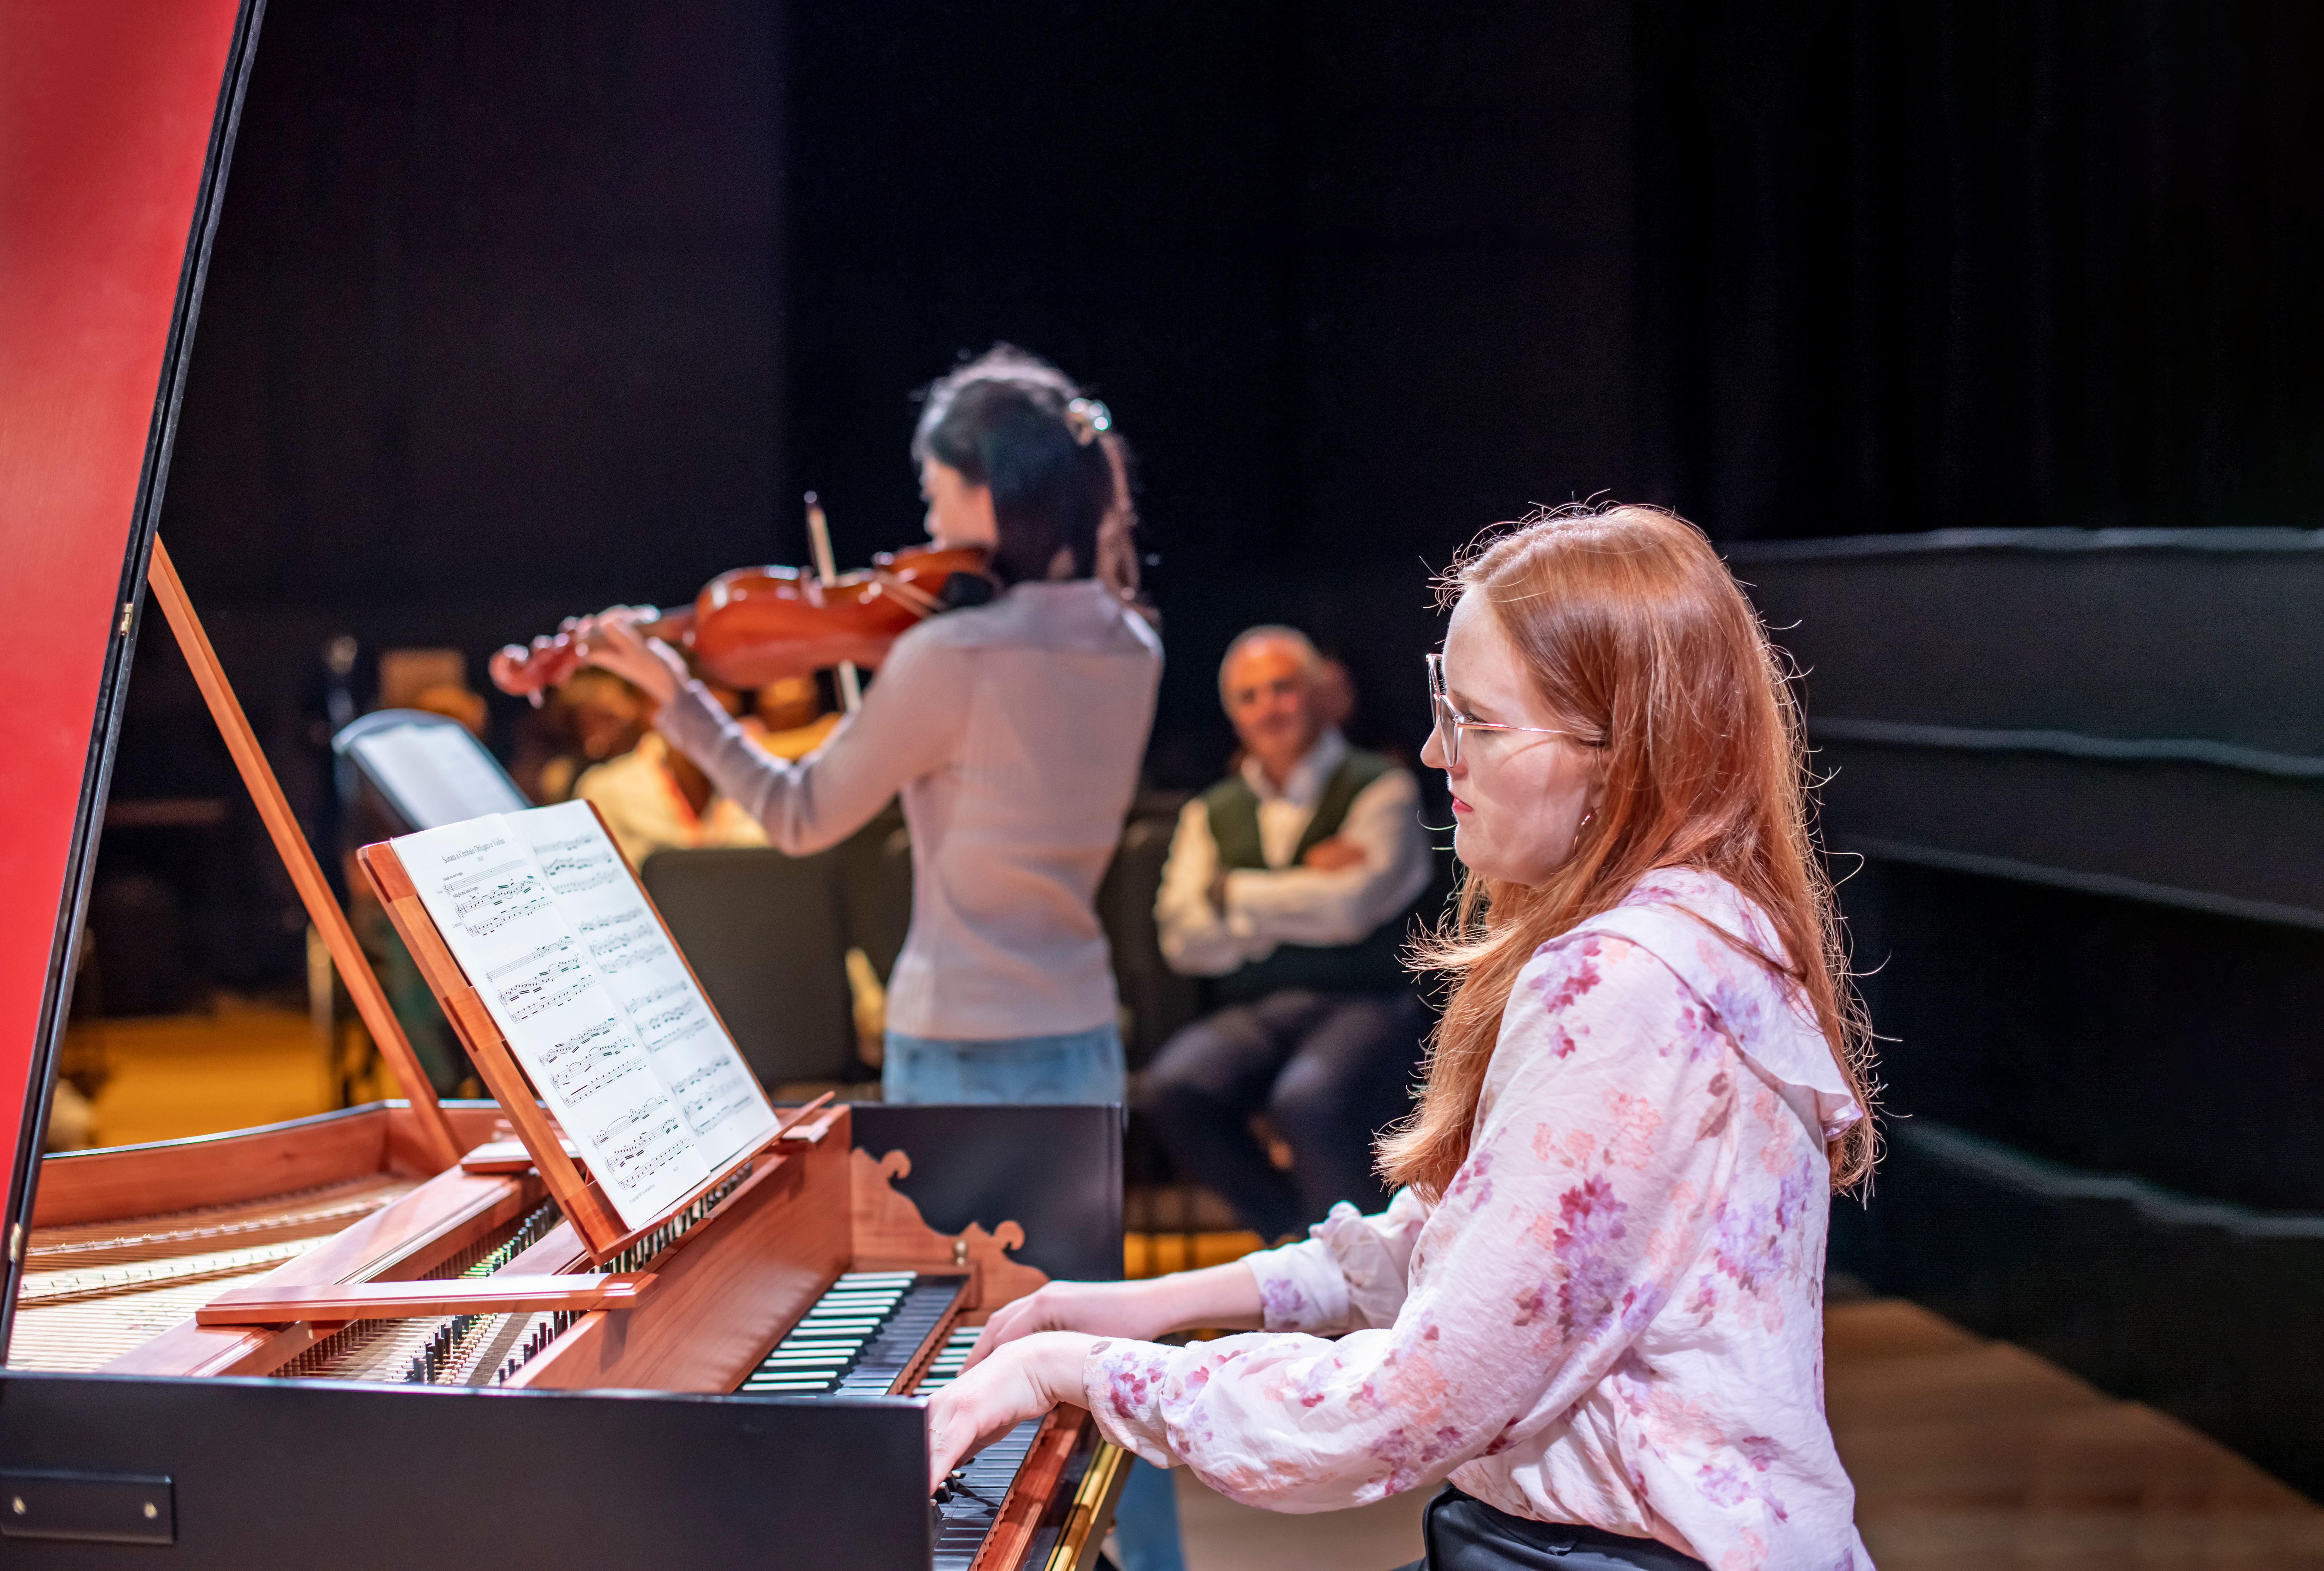 A female student, with glasses, red hair and a pink shirt, playing on a harpsichord, with a student performing in the background.